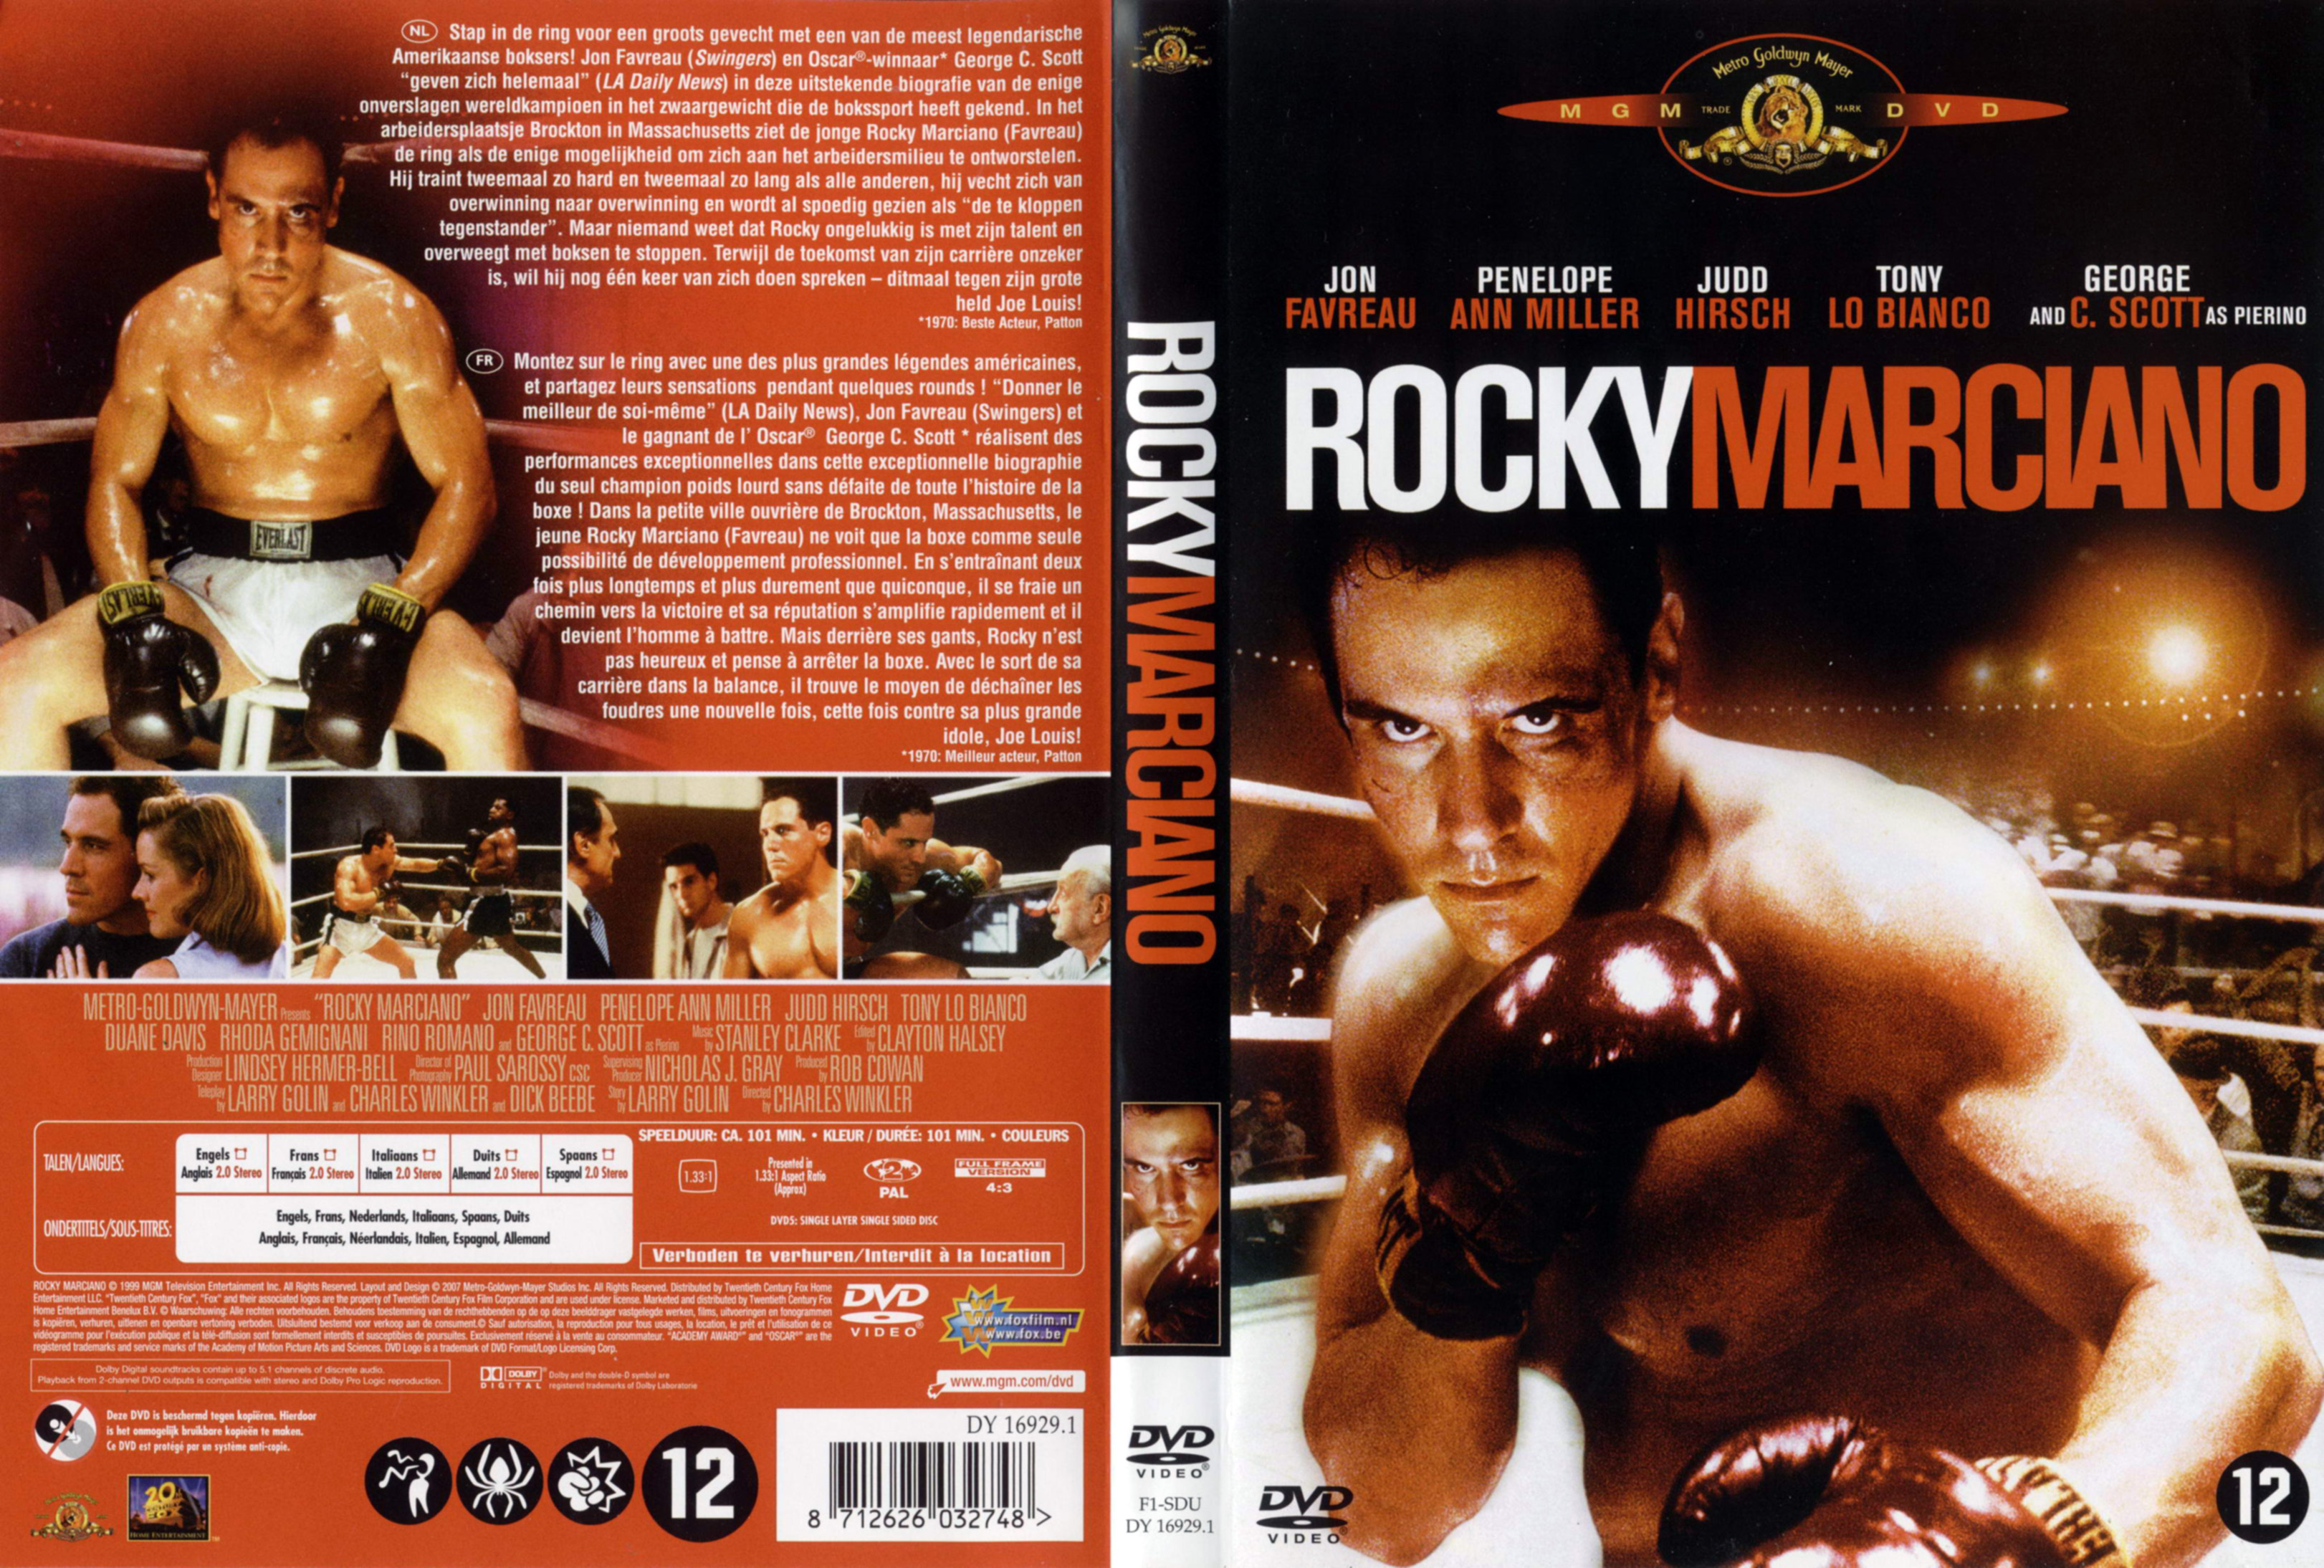 Jaquette DVD Rocky Marciano